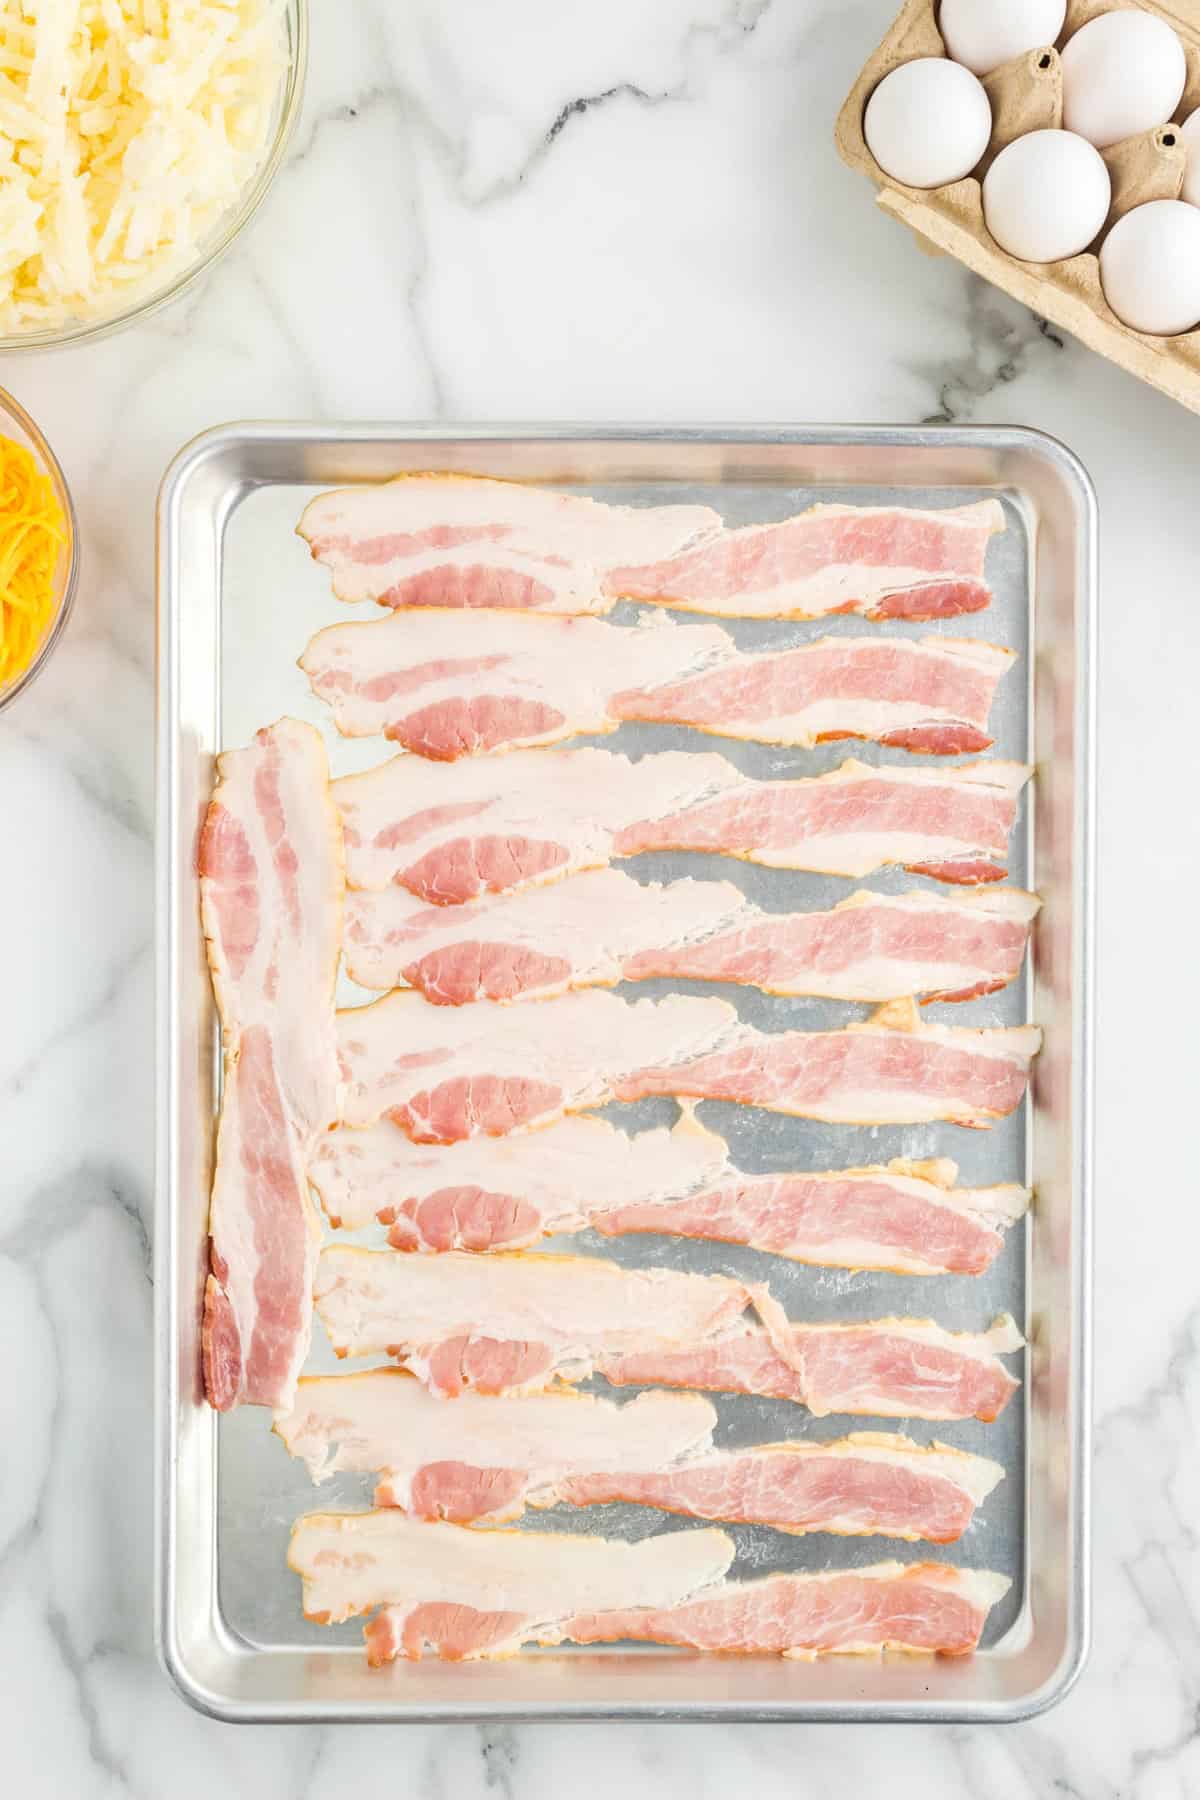 Bacon on Tinfoil-Lined Pan for Sheet Pan Breakfast Recipe